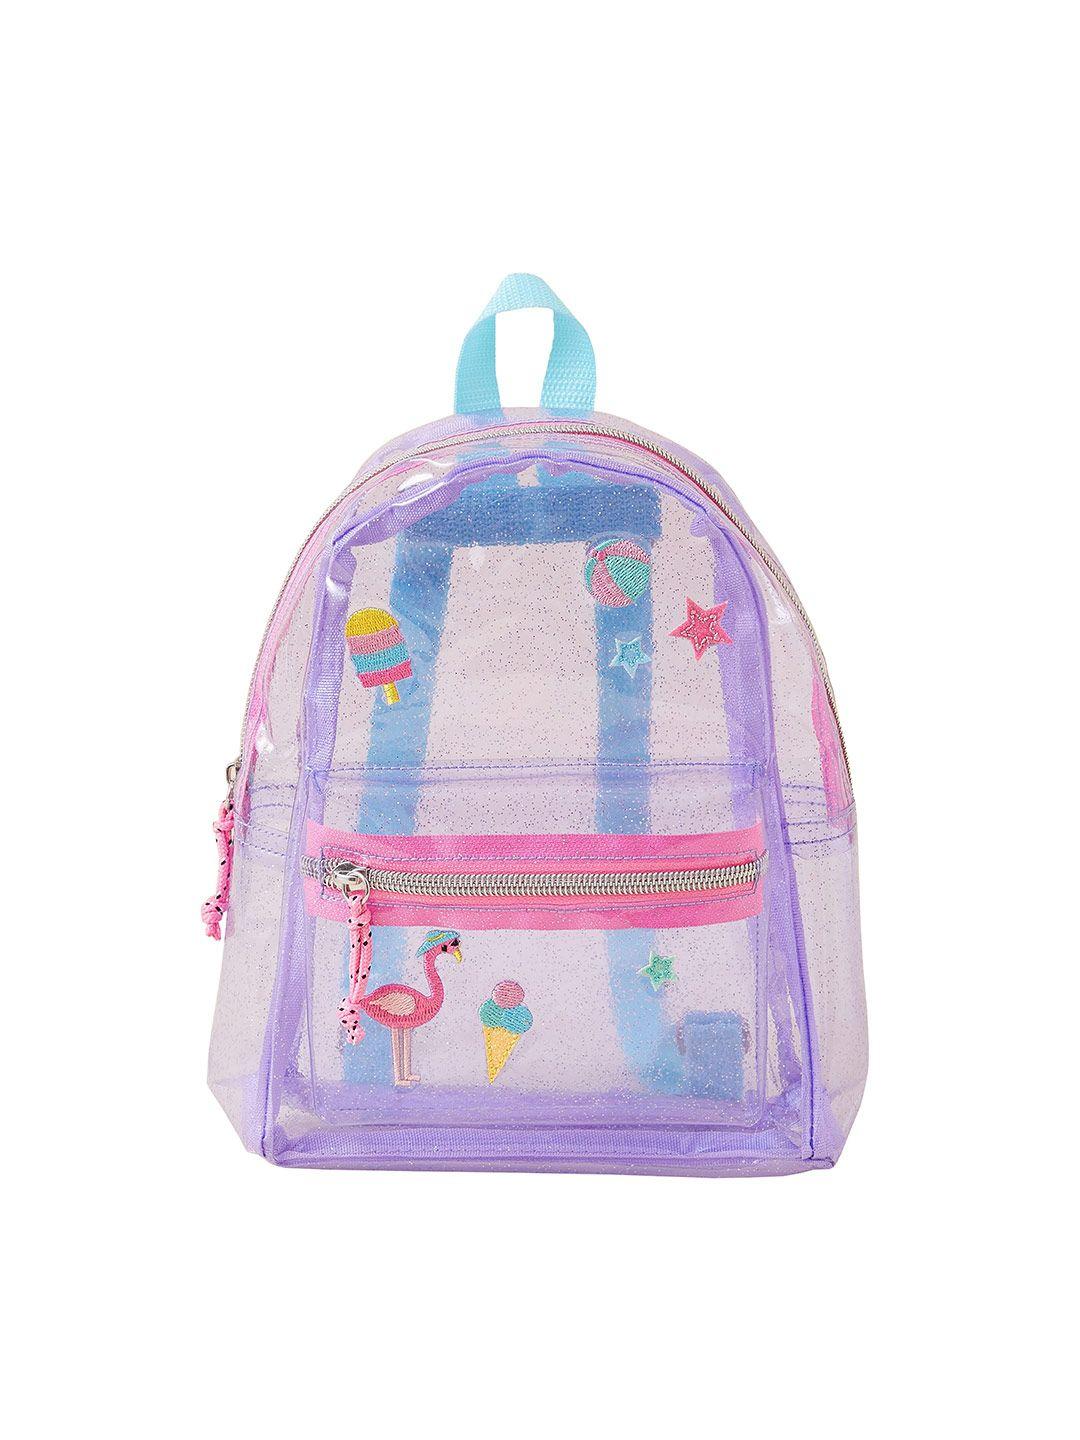 accessorize girls embroidered backpack